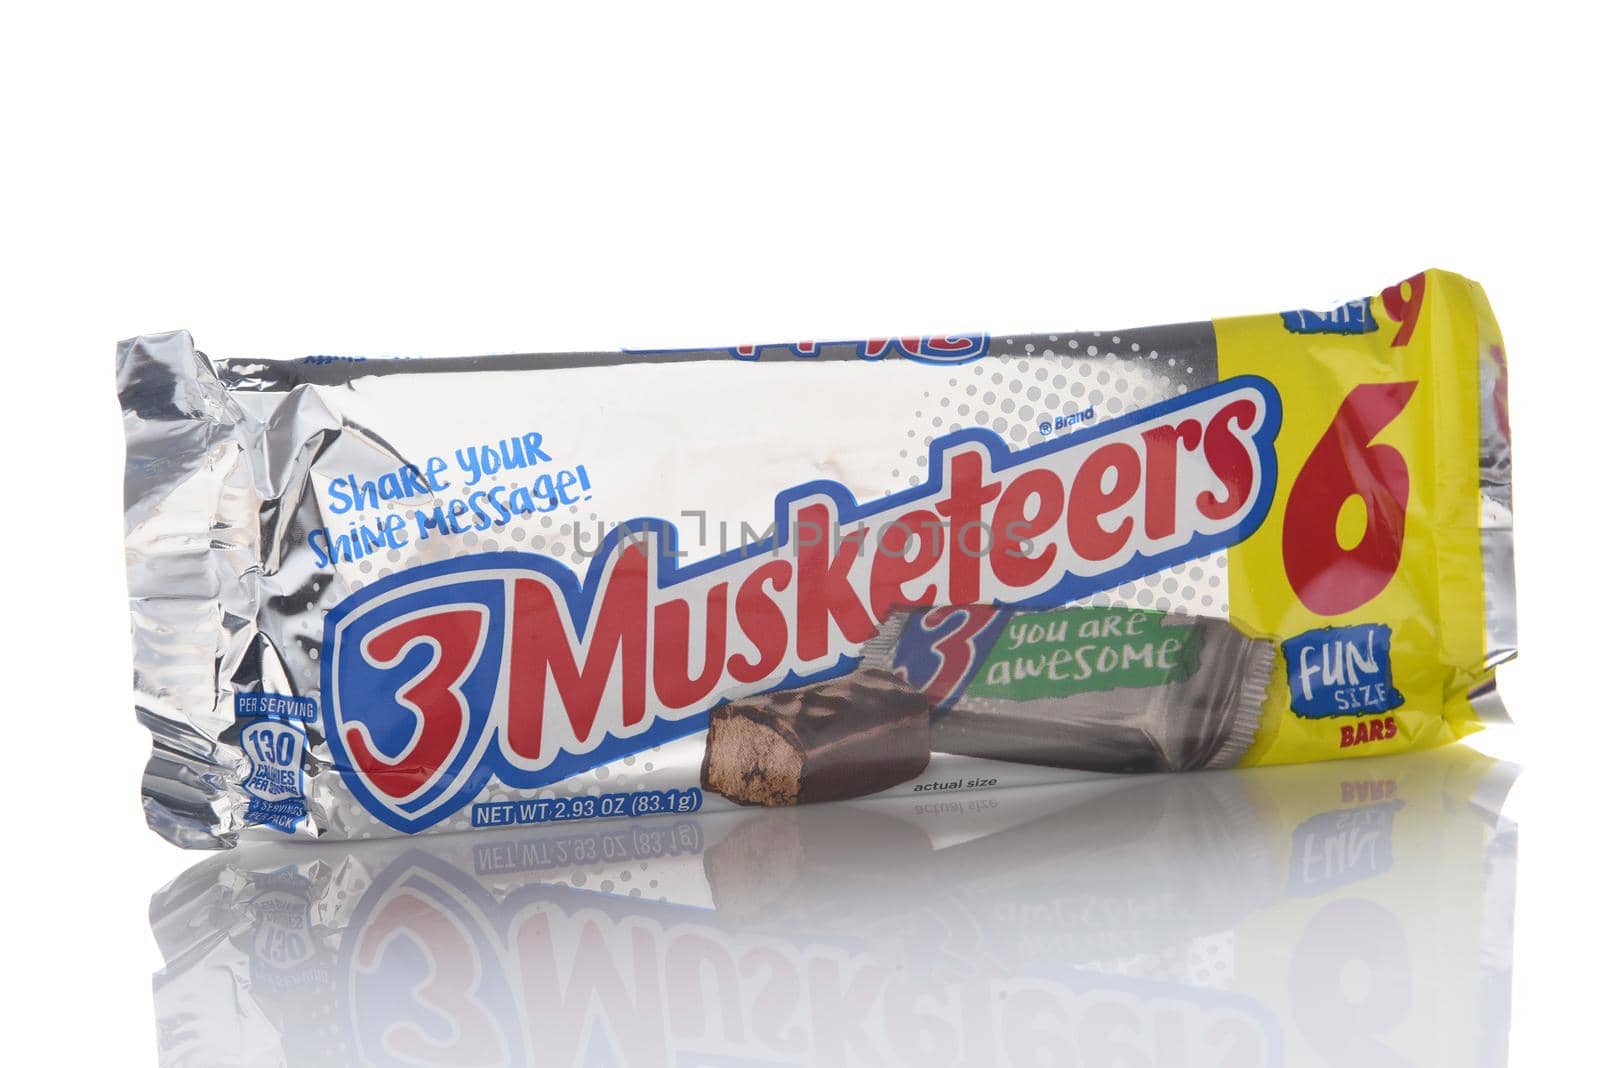 IRVINE, CALIFORNIA - 9 OCT 2019: A package of 6 Fun Size 3 Musketeers Candy Bars. 